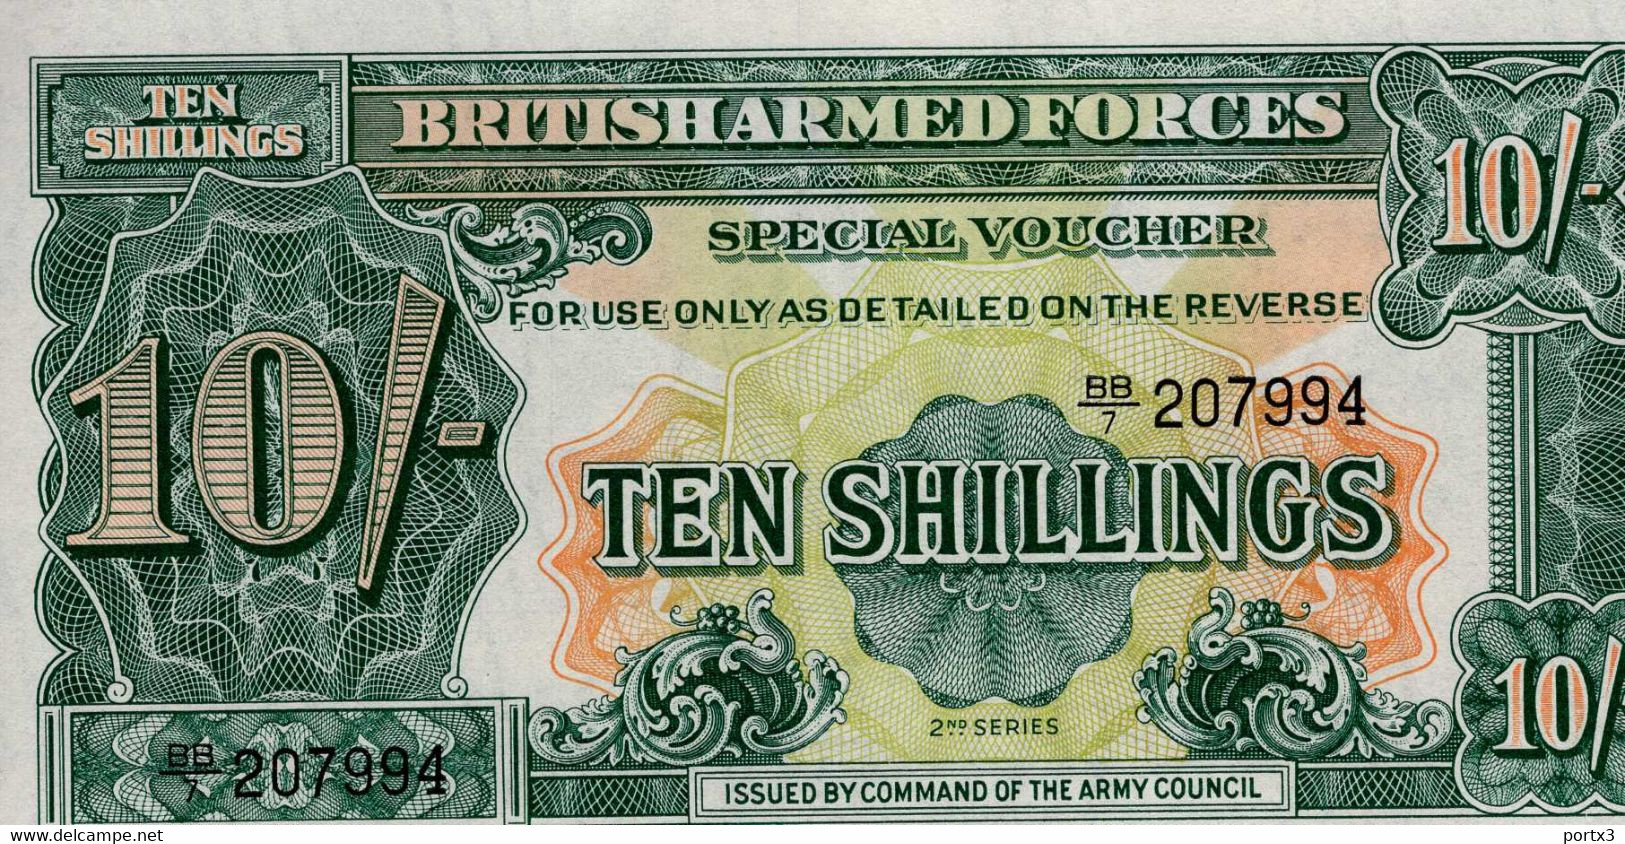 British Banknoten 5 Stück Each With Ten Shilling BB 7 - British Armed Forces & Special Vouchers